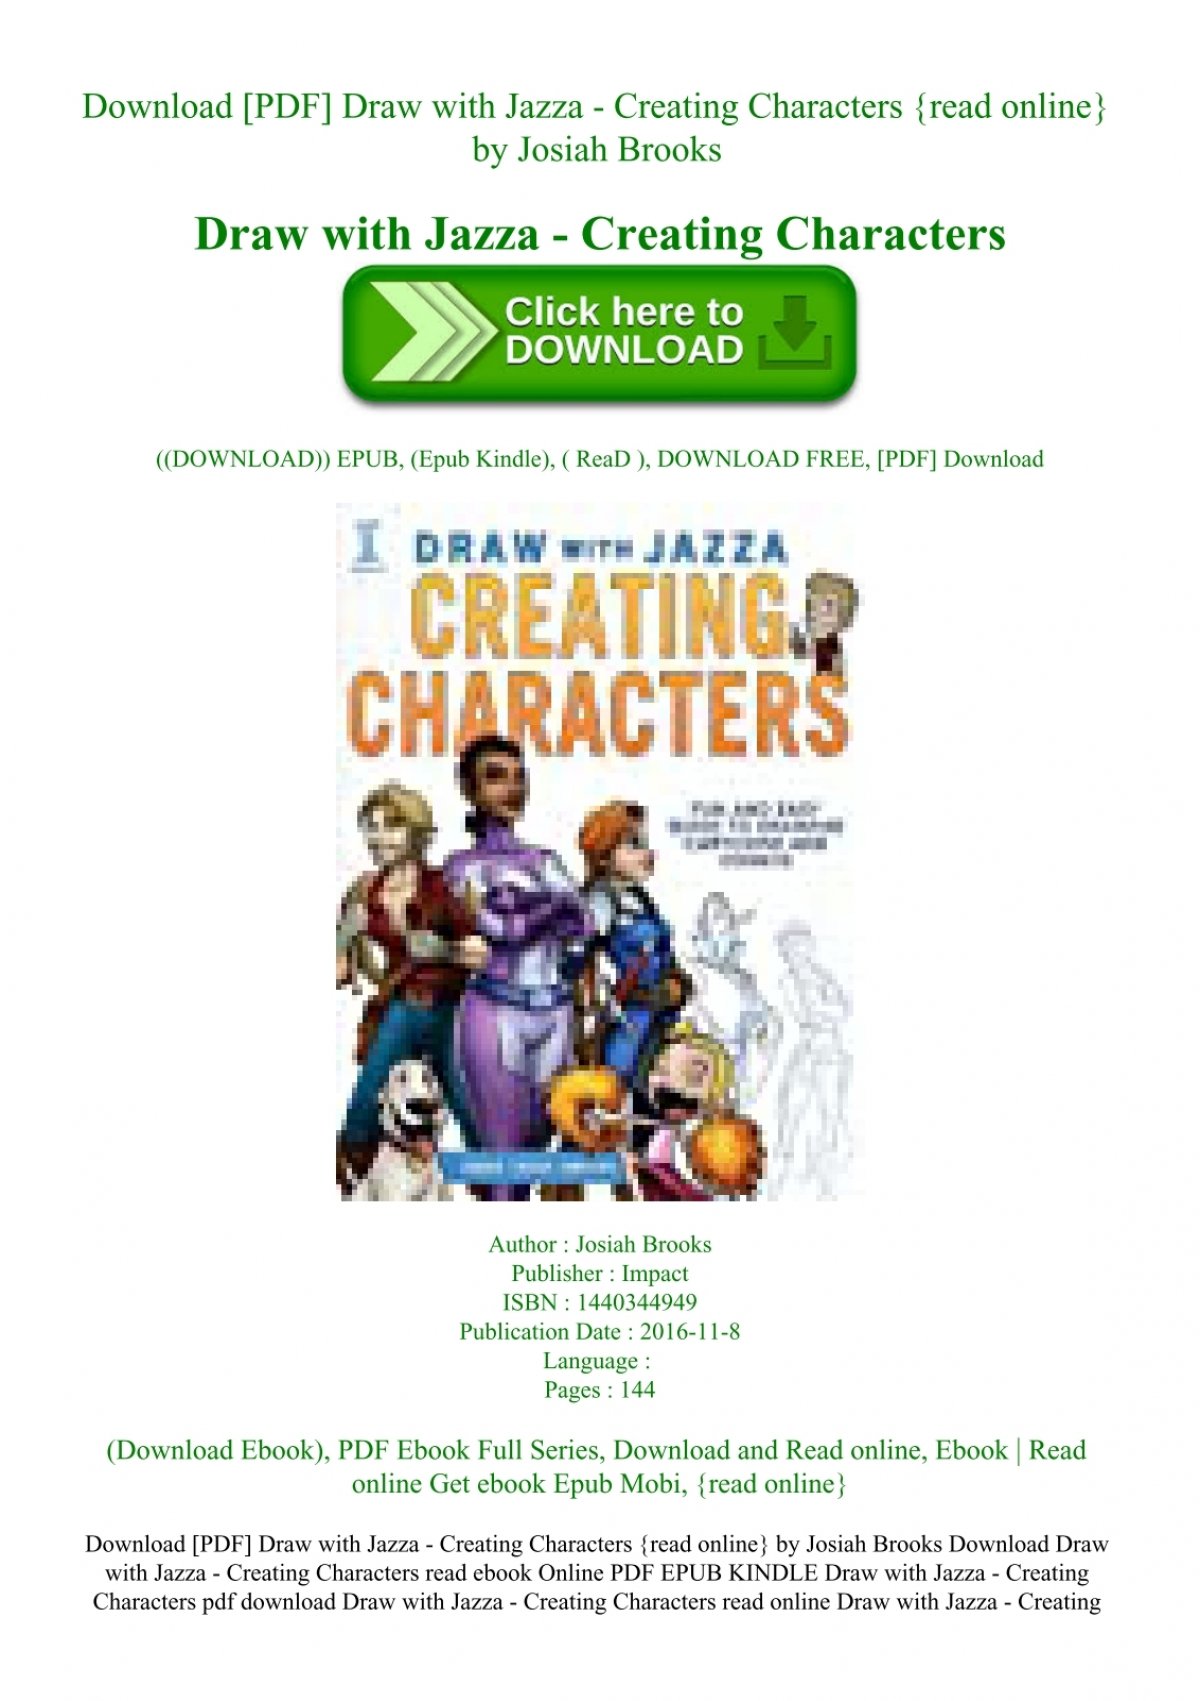 Download Pdf Draw With Jazza Creating Characters Read Online By Josiah Brooks